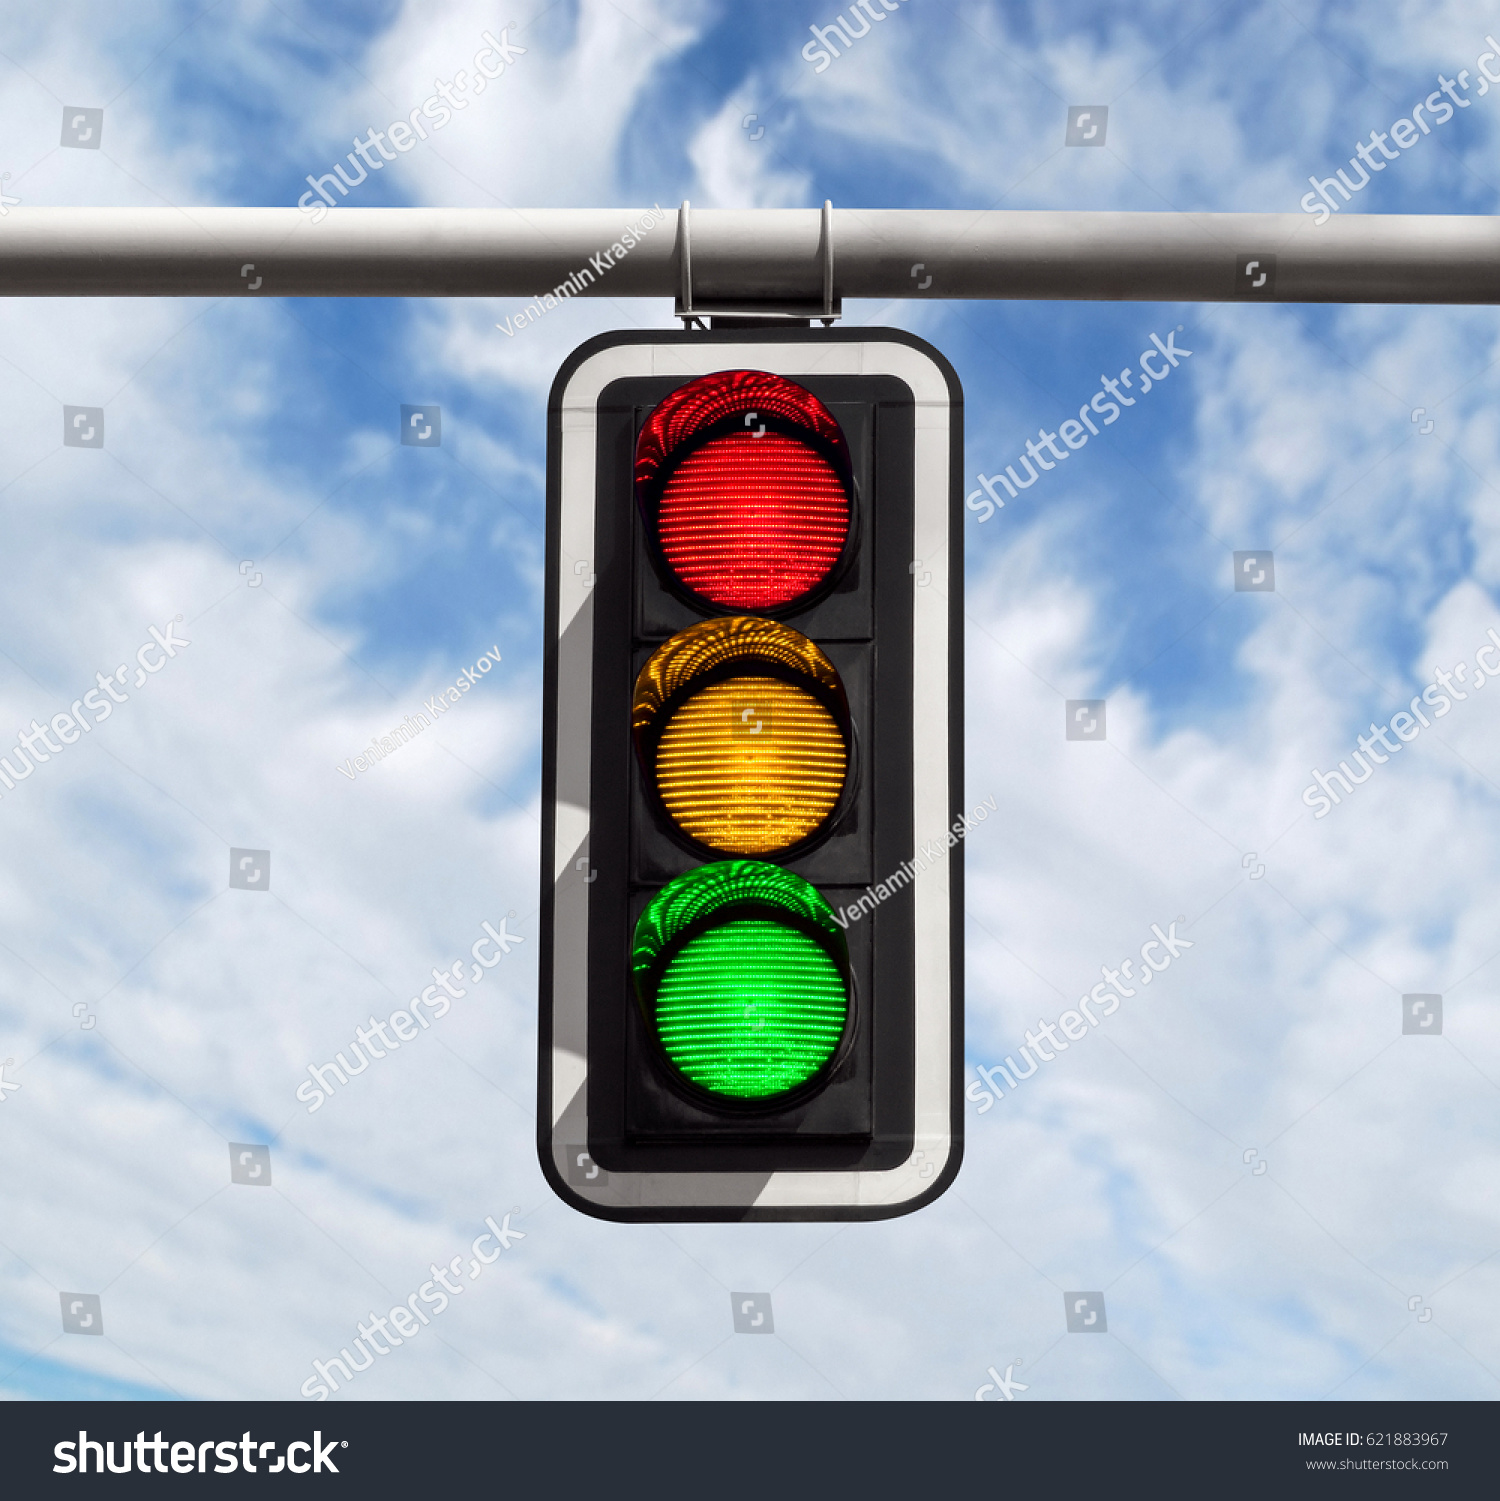 Traffic light against blue sky background with Clipping Path #621883967